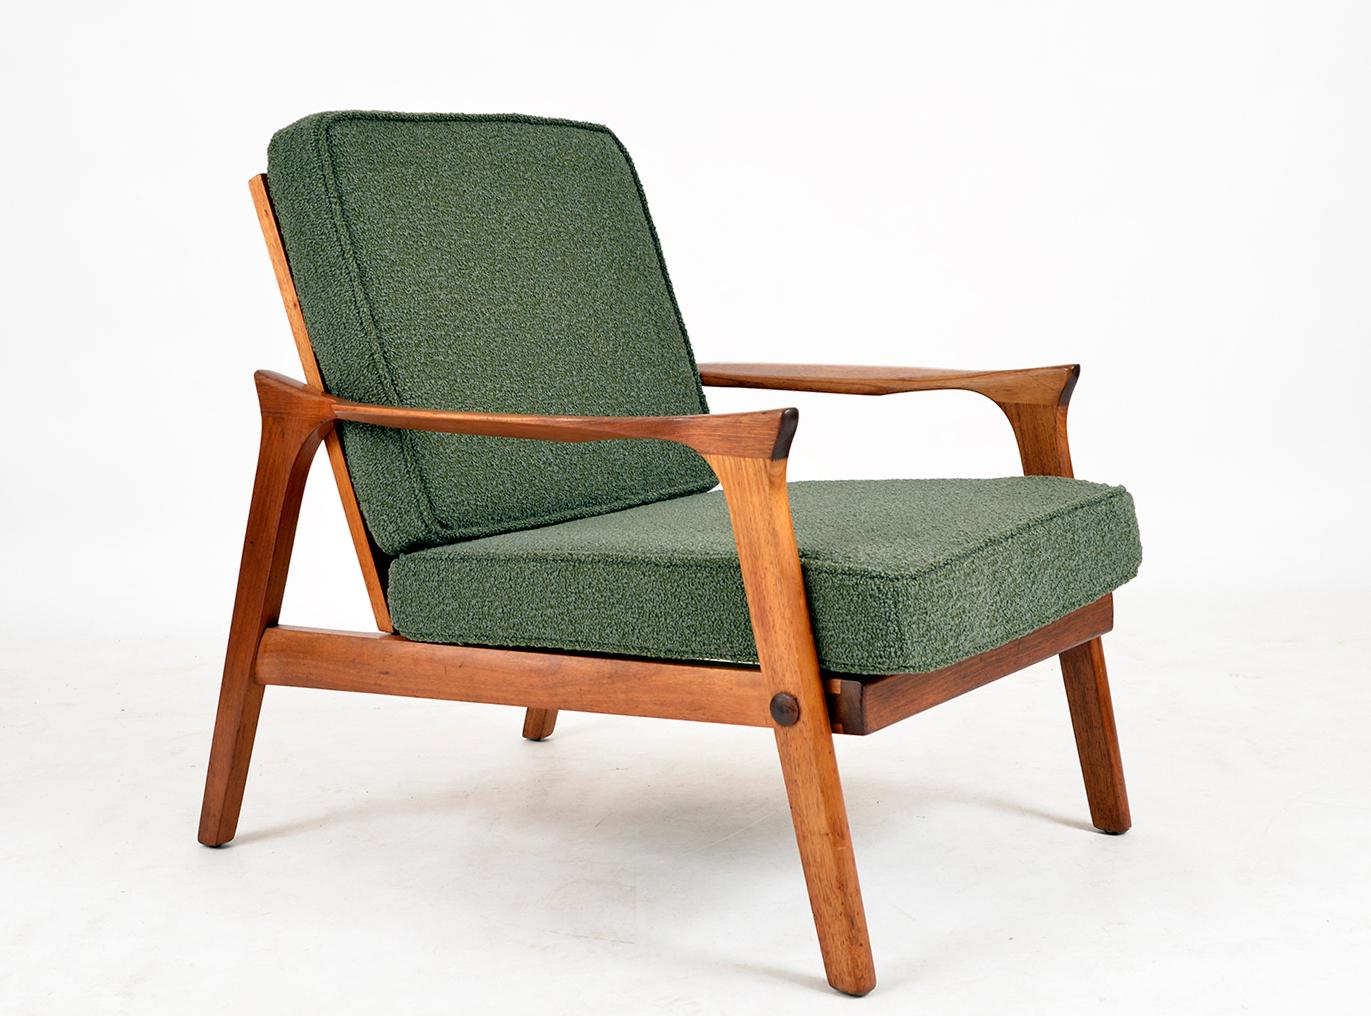 A very nice example of the classic Danish Deluxe “Inga” armchair, produced in Melbourne, Australia in 1963. The frame, made from Tasmanian blackwood, has great angles, beautiful detailing and wide sculpted armrests. 
The chair retains its springs